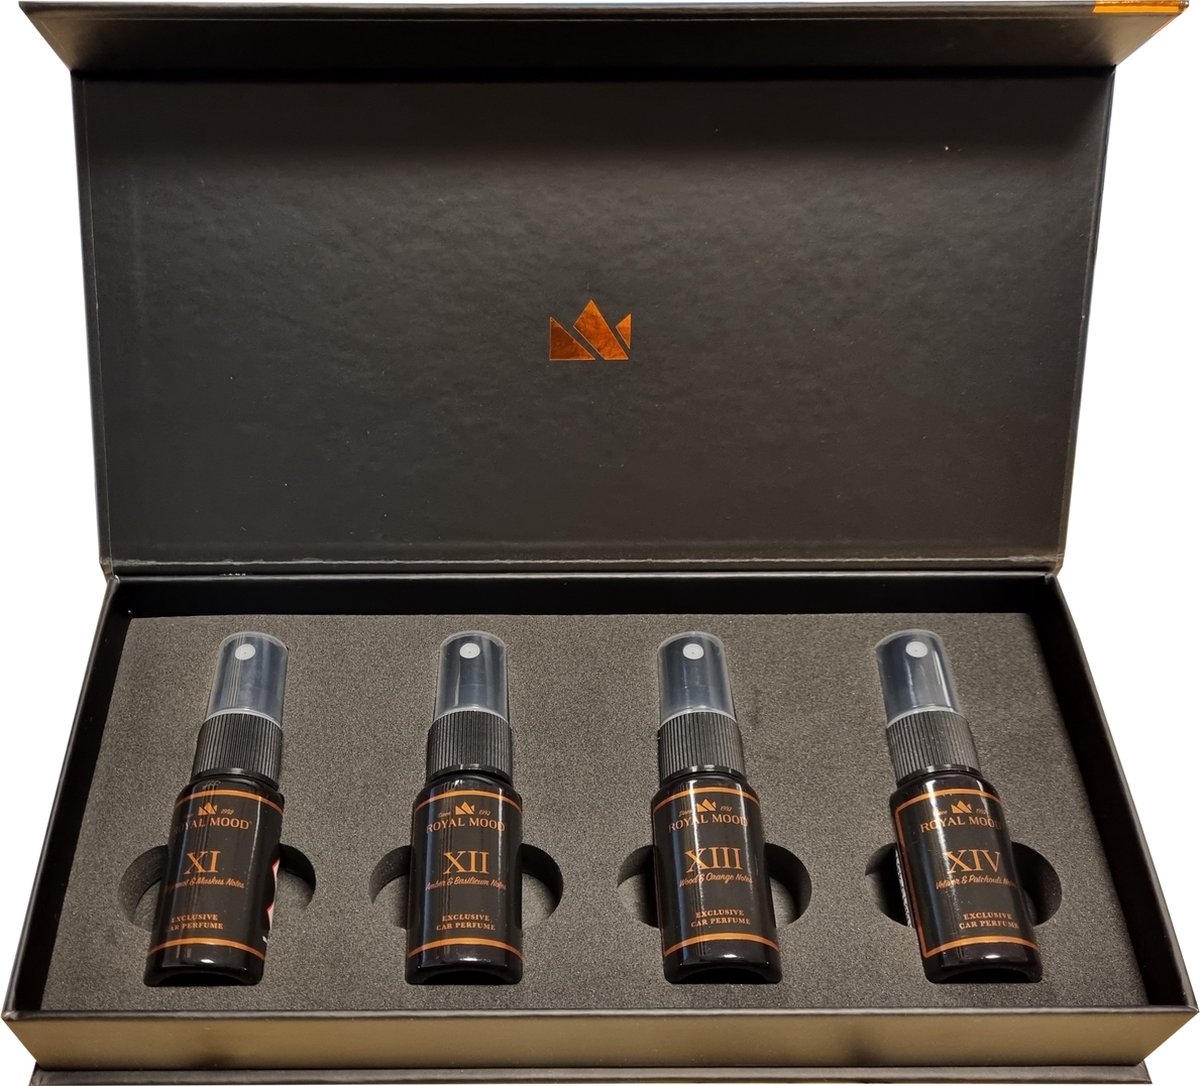 Royal Mood - Try Out Box - 4 x 15ml - Exclusieve Auto Parfum